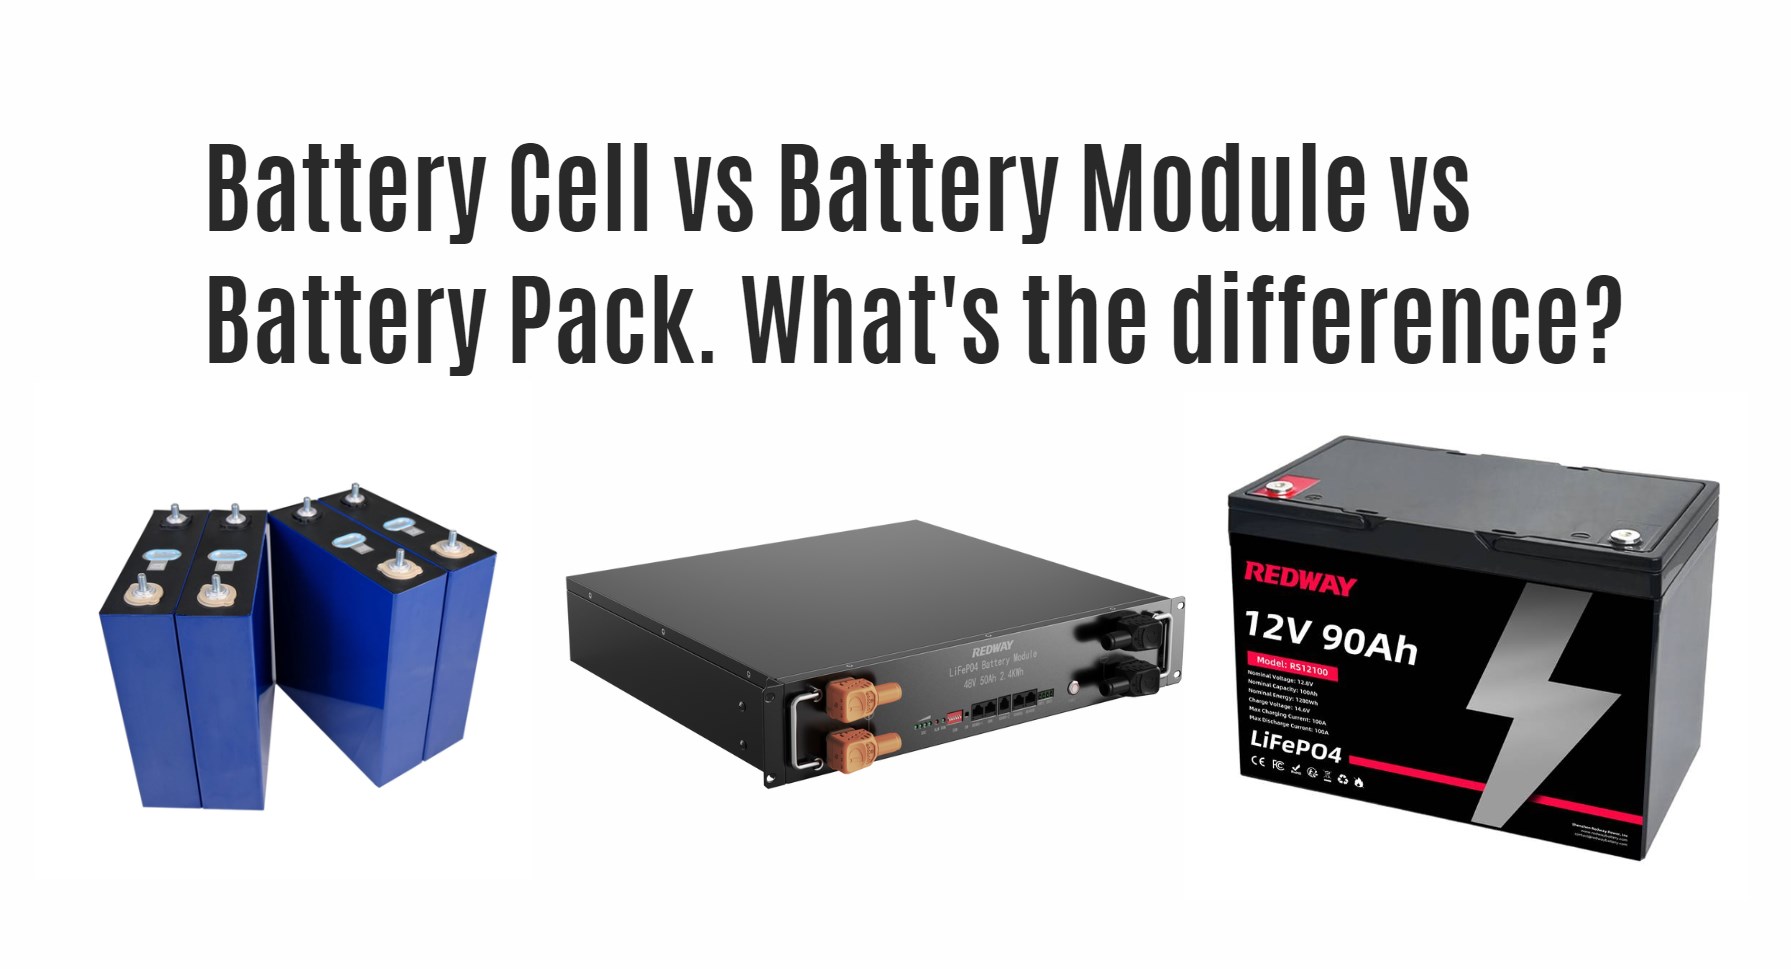 Battery Cell vs Battery Module vs Battery Pack. What's the difference?